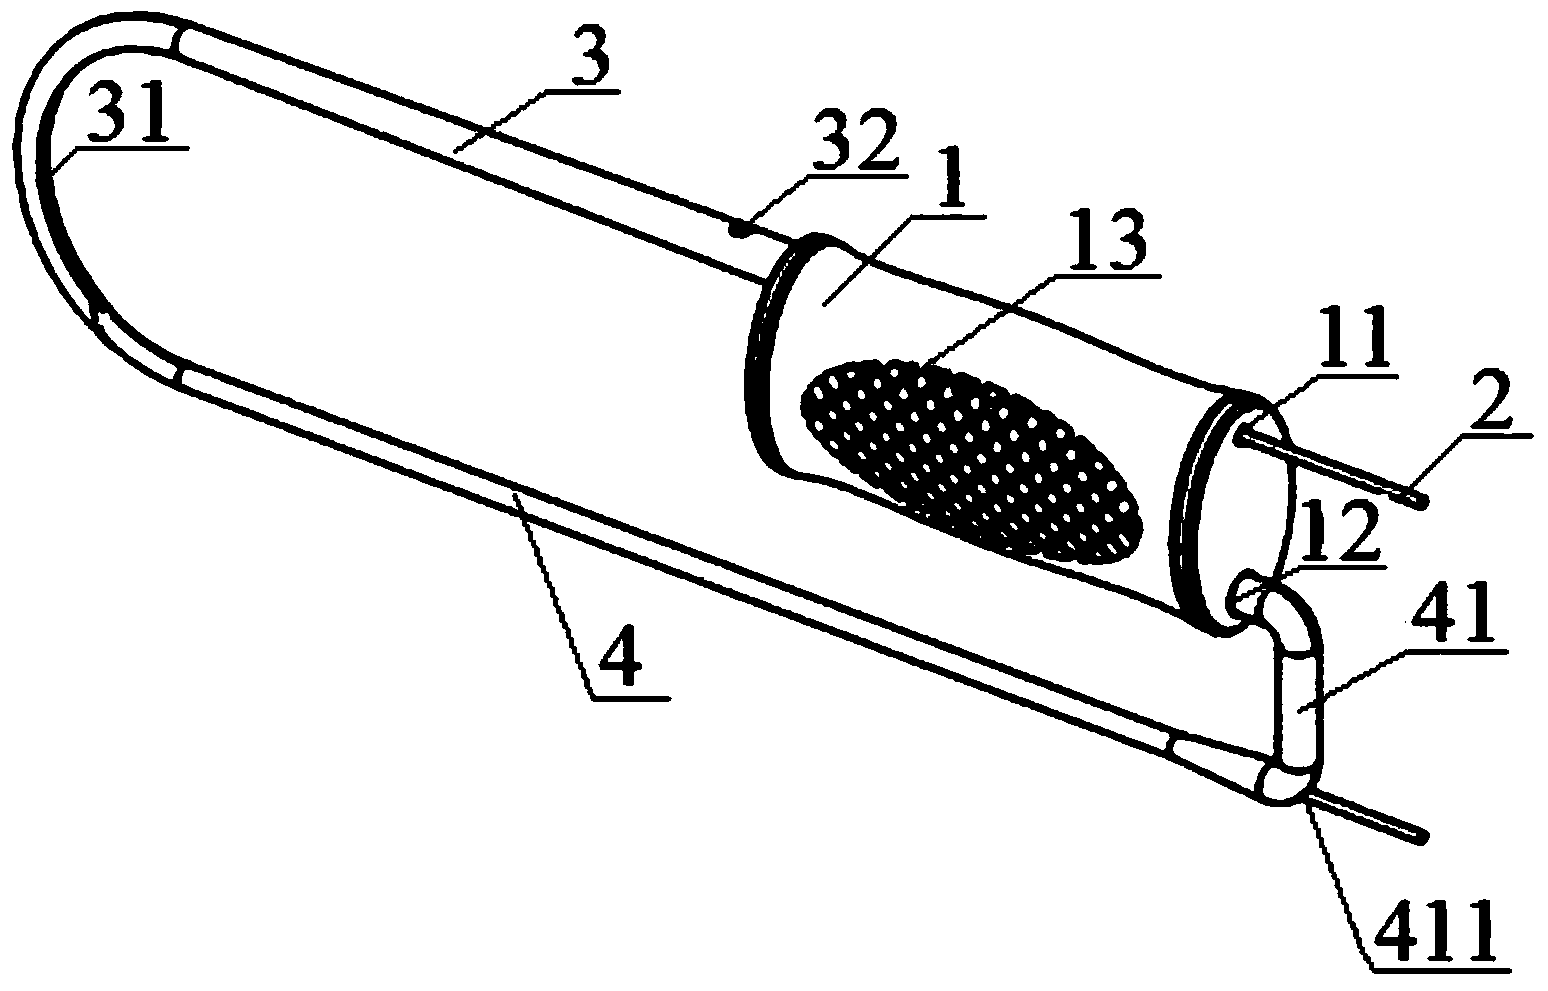 Steel wire guiding device for intertrochanteric fracture